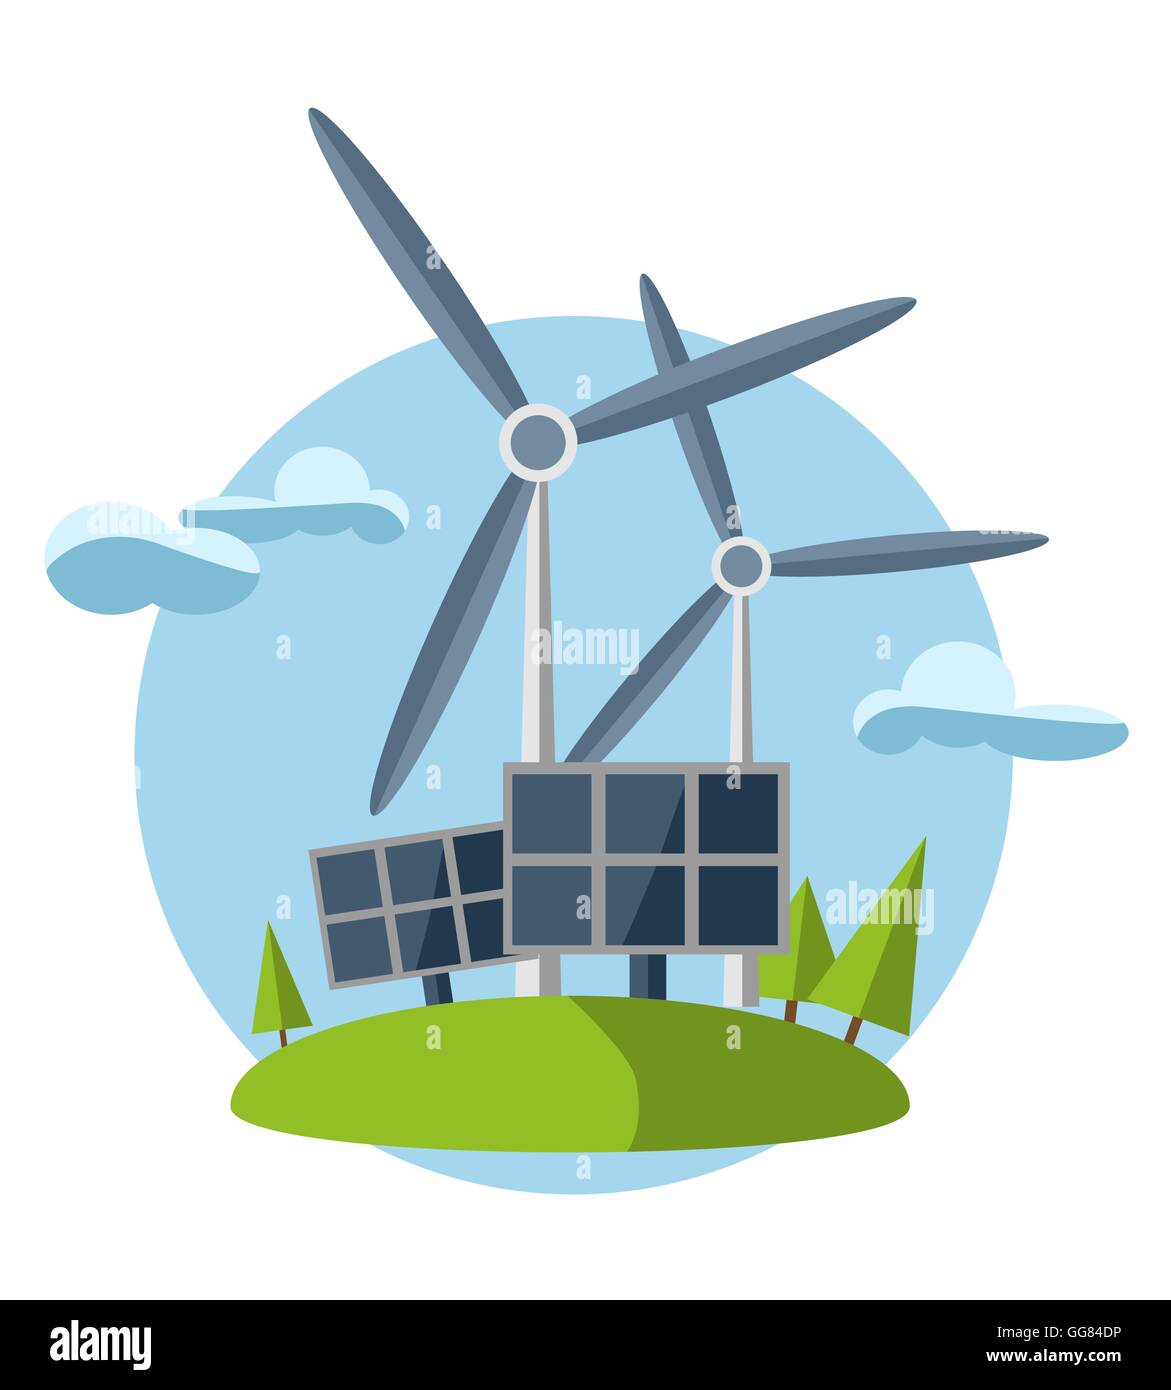 concept illustration with icon of green energy Stock Vector